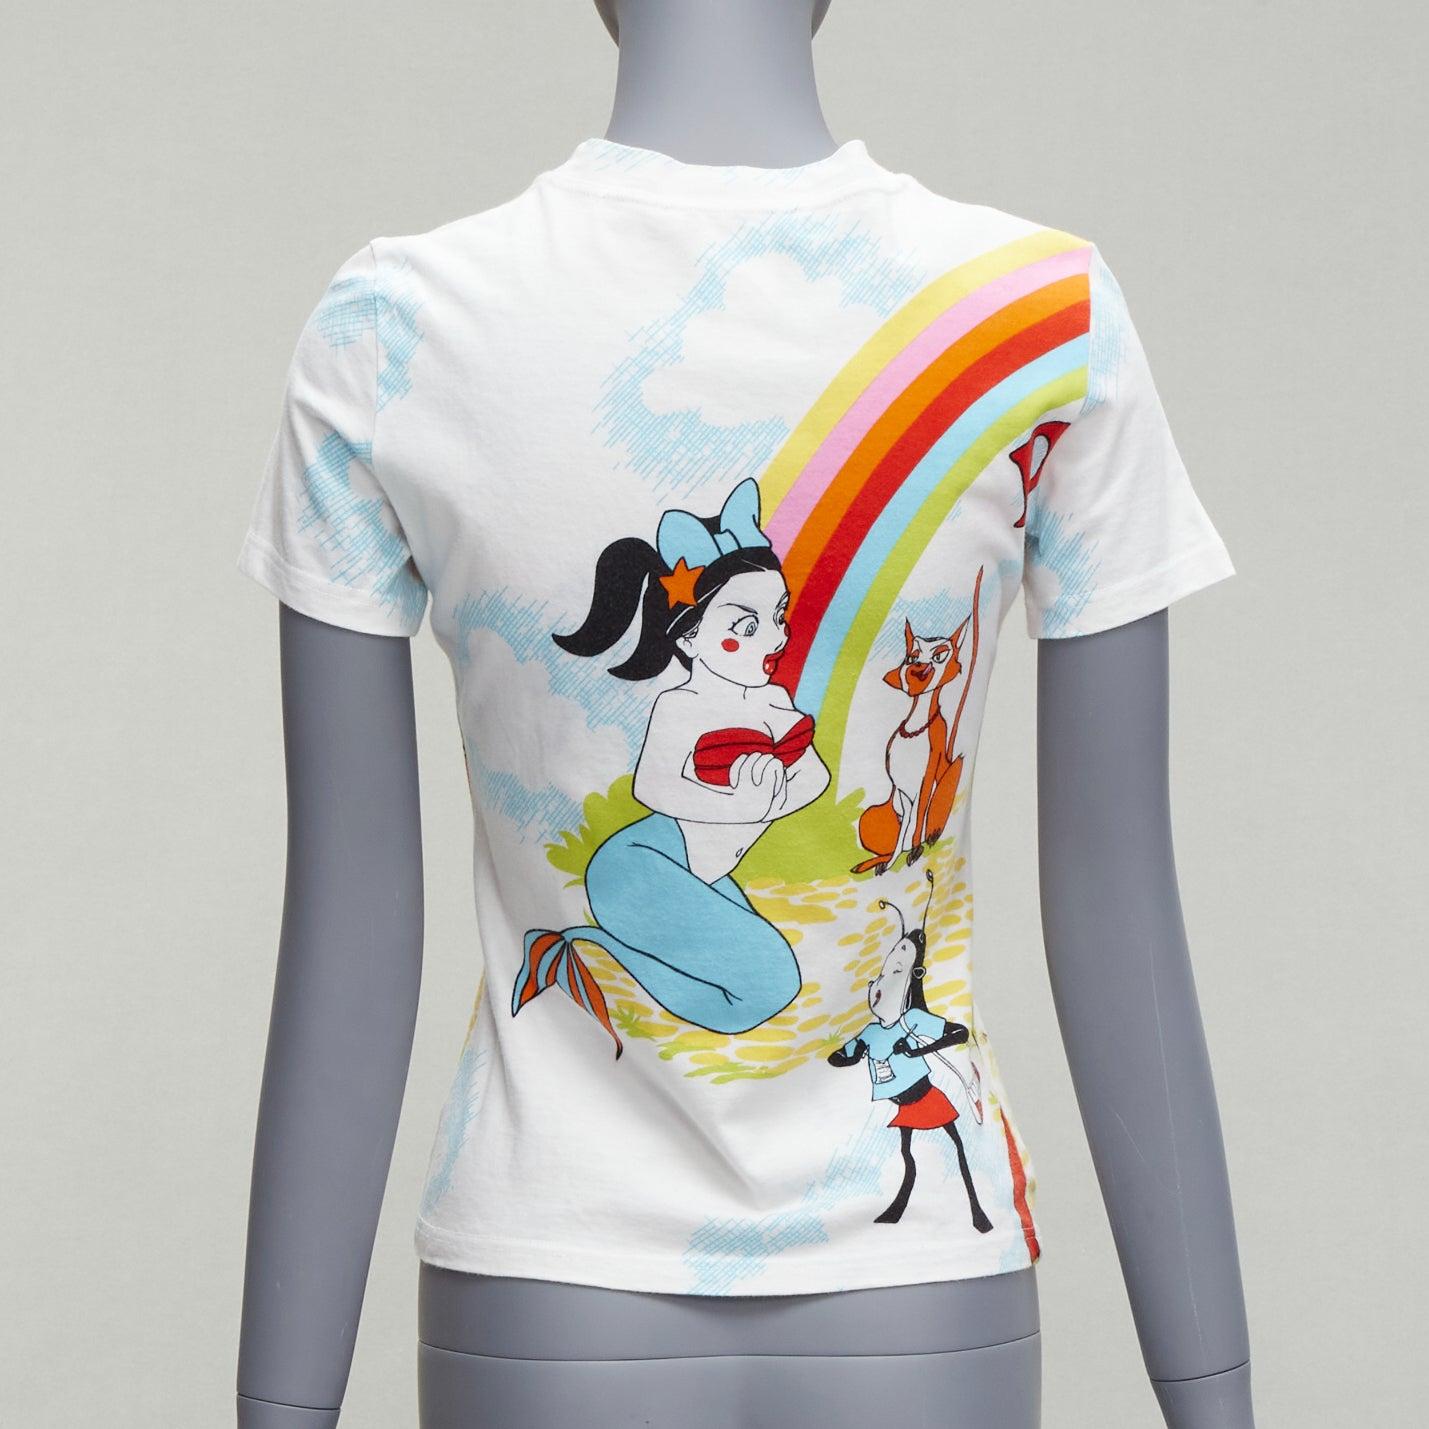 CHRISTIAN DIOR John Galliano 2002 Vintage white rainbow fairytale tshirt FR40 L
Reference: TGAS/D00568
Brand: Christian Dior
Designer: John Galliano
Collection: 2002
Material: Cotton
Color: White, Multicolour
Pattern: Cartoon
Closure: Pullover
Extra